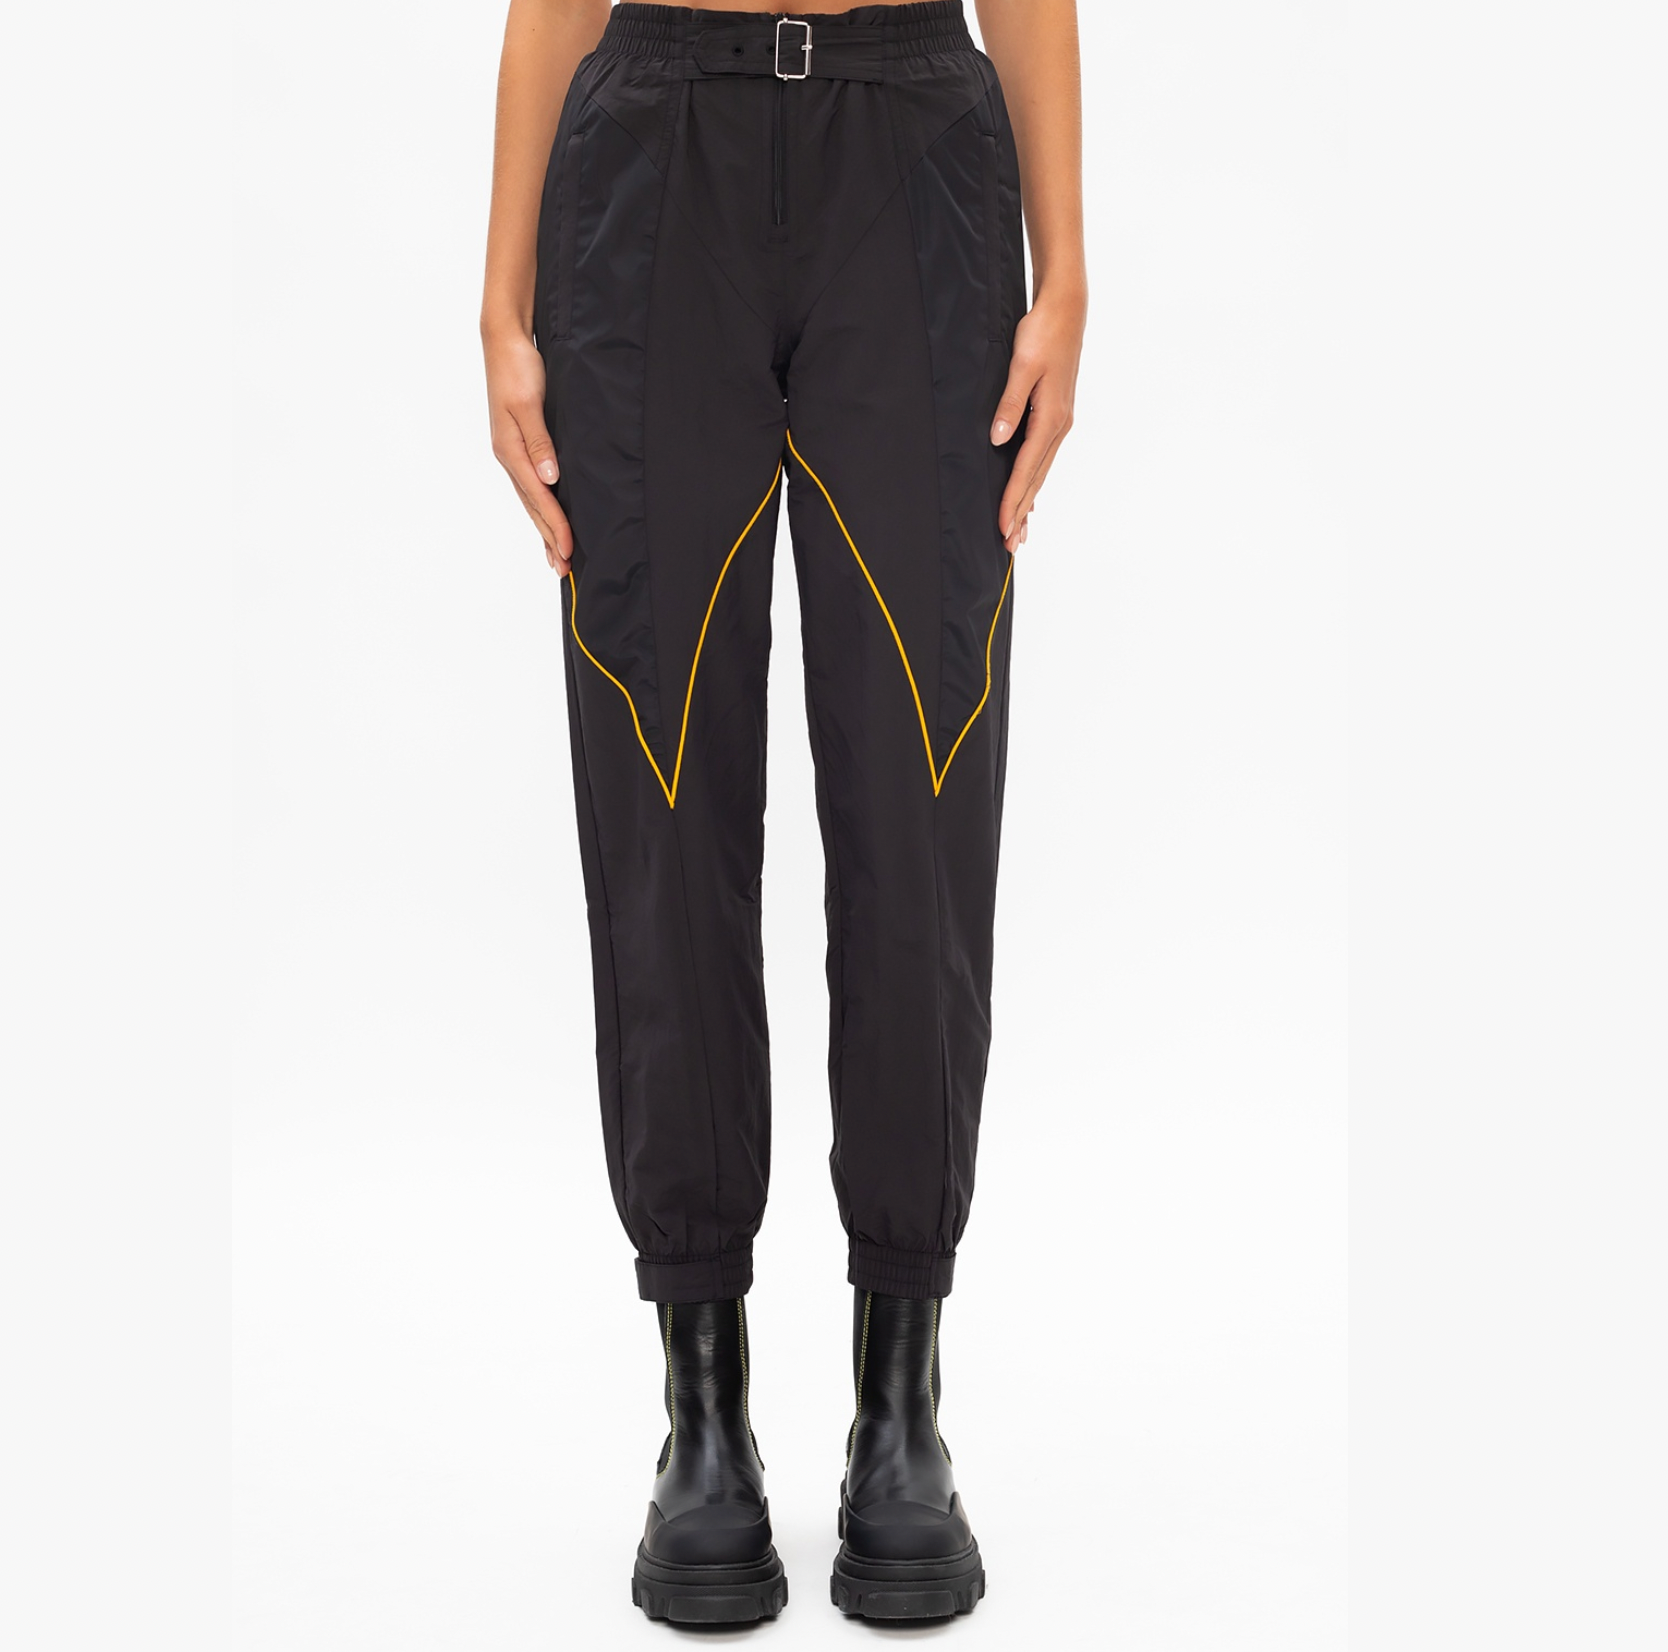 Paolina Russo for Adidas track pants